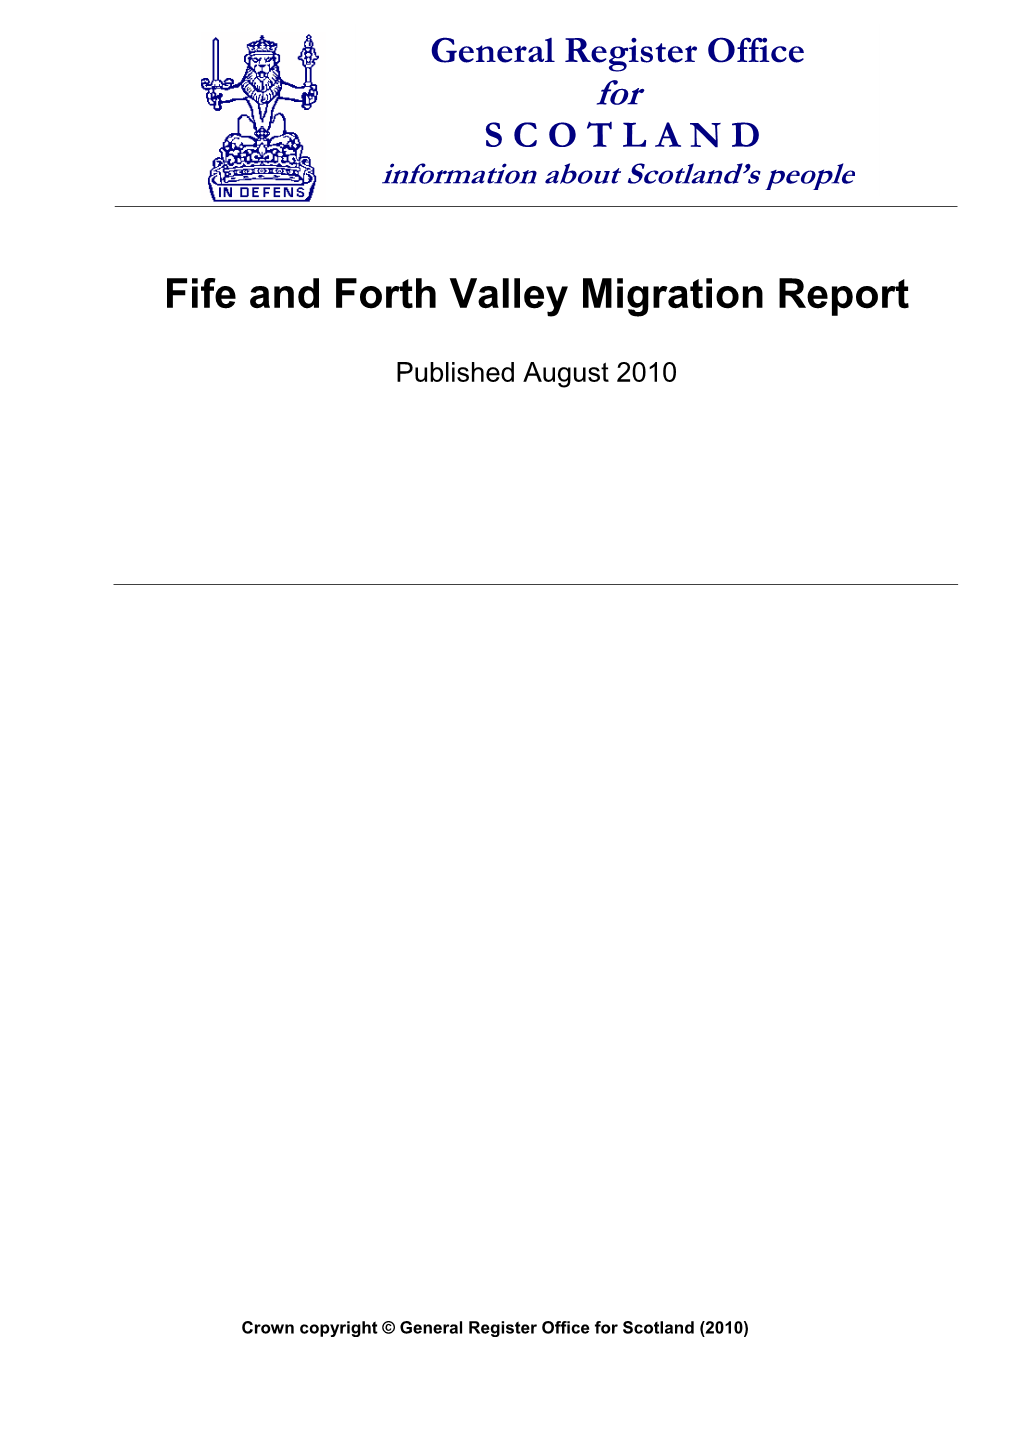 Fife and Forth Valley Migration Report